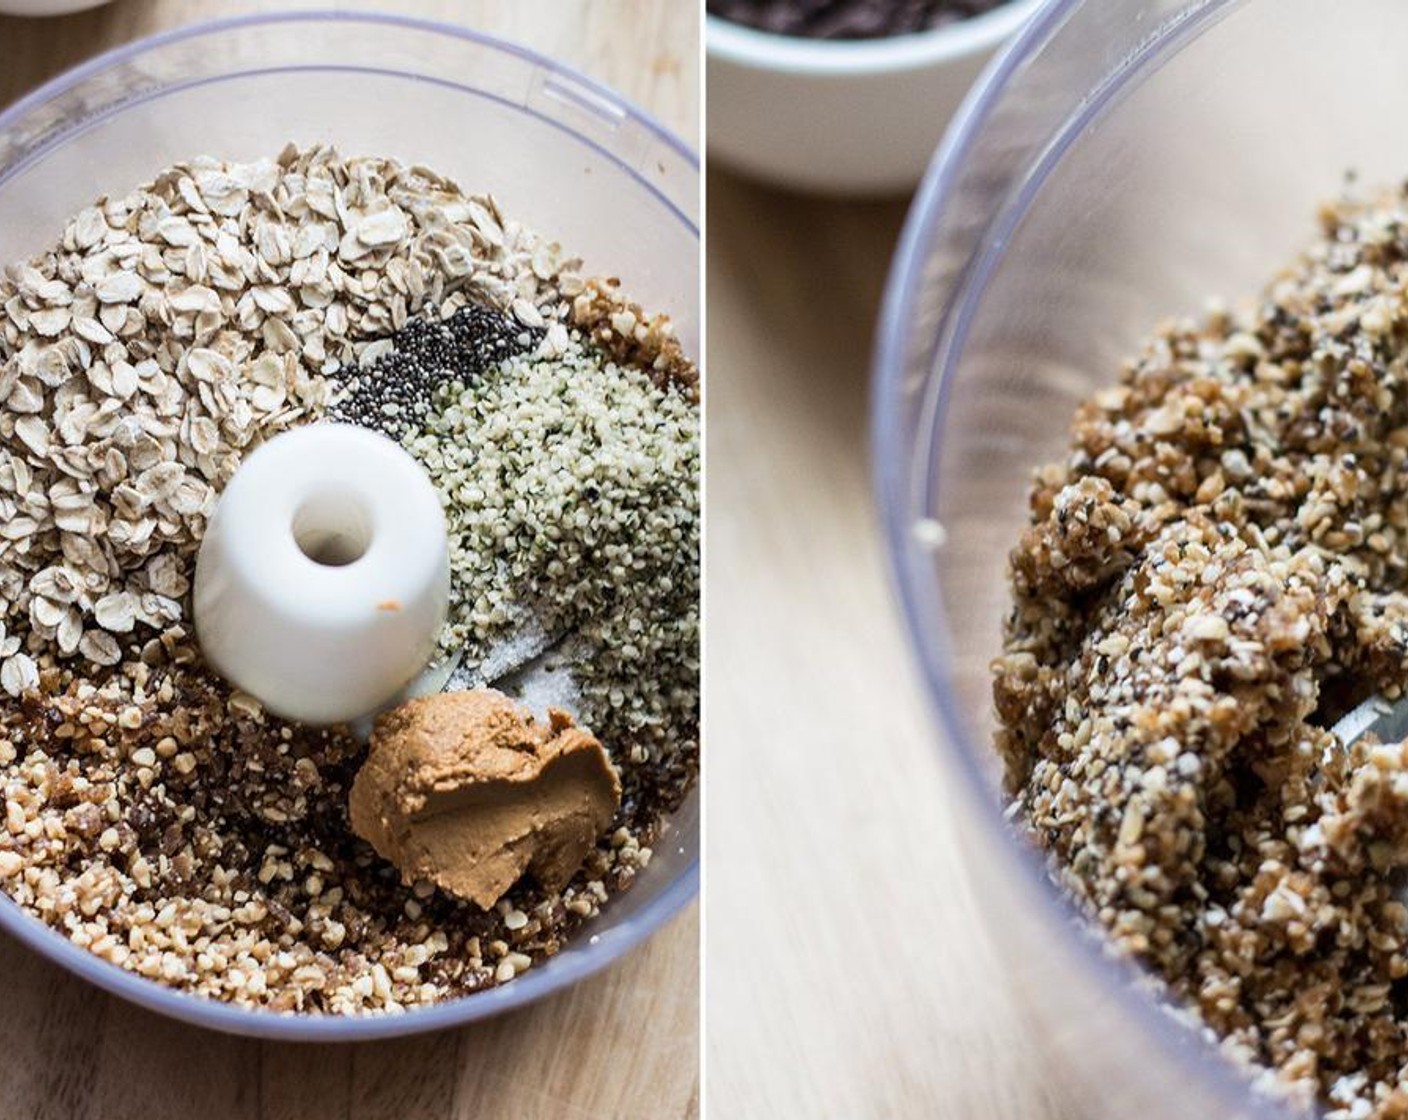 step 3 Add Old Fashioned Rolled Oats (3/4 cup), Chia Seeds (1 Tbsp), Hemp Hearts (2 Tbsp), Powdered Peanut Butter (2 Tbsp), Water (1 1/2 Tbsp), Vanilla Extract (1 tsp) and Salt (1/4 tsp). Process another 20-30 seconds or until ingredients are finely chopped and well blended.